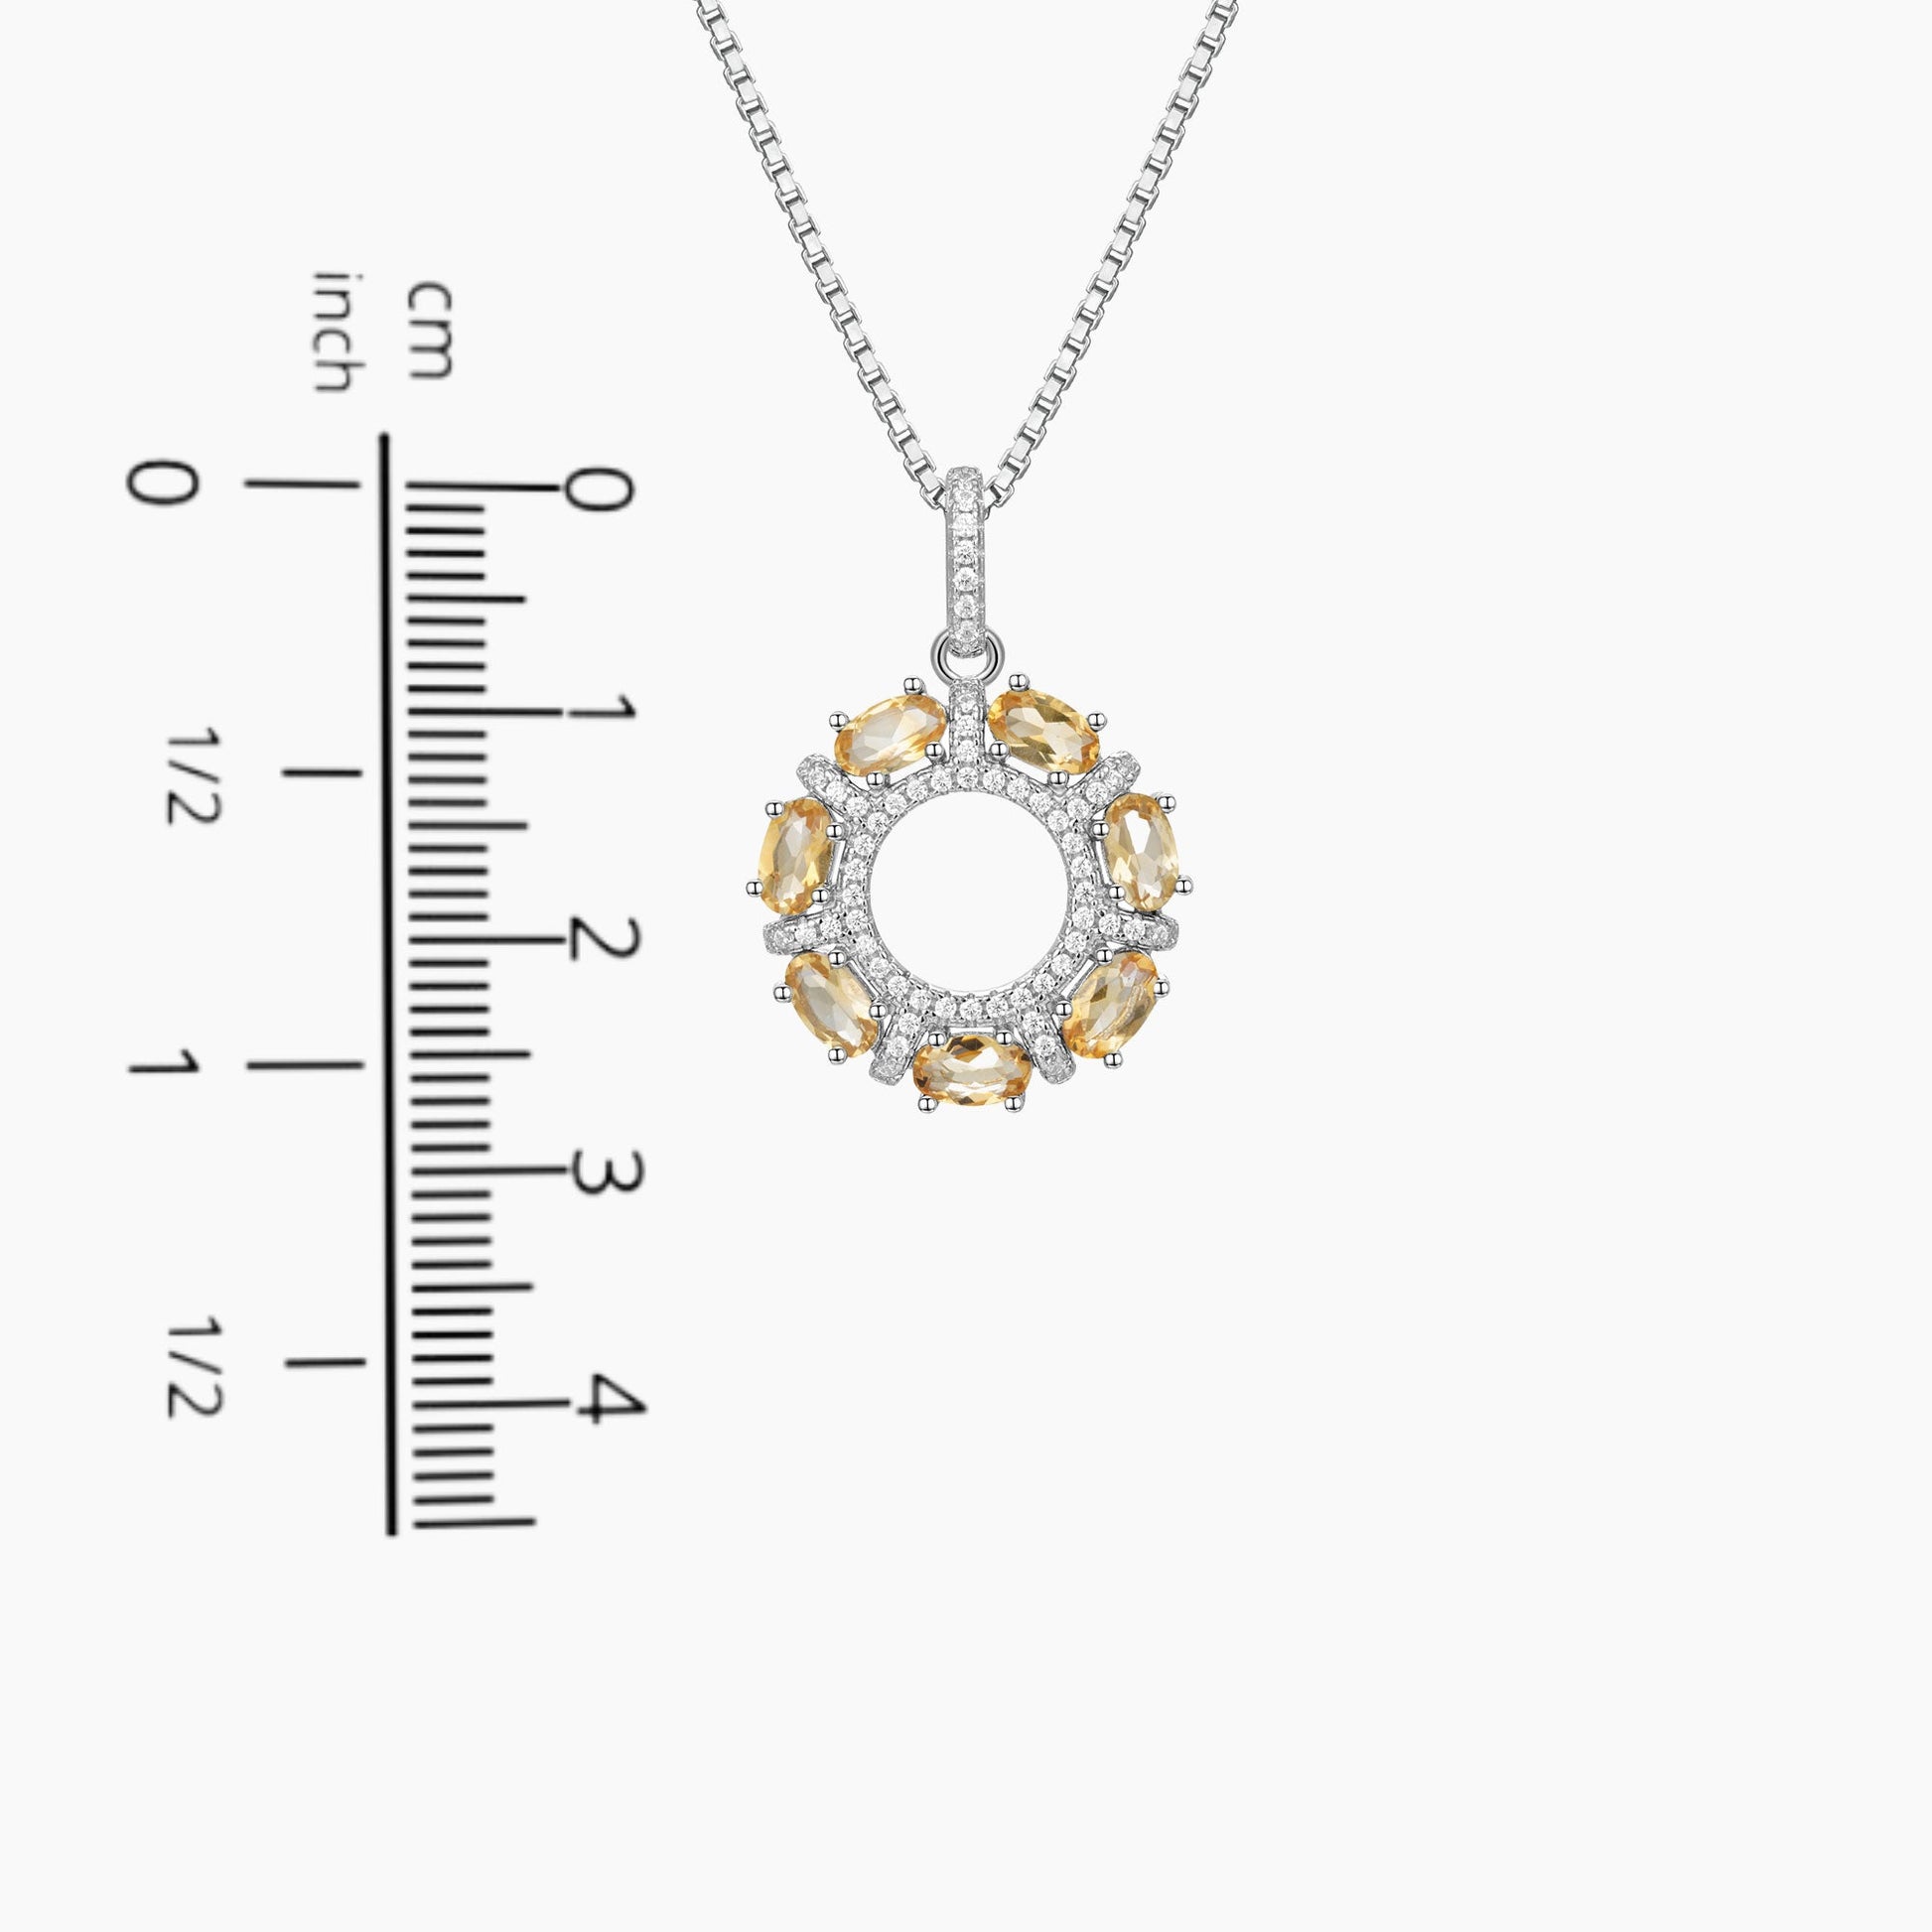 Citrine Galaxy Pendant Necklace with Scale - Image displaying necklace with scale, providing size reference for accurate measurement